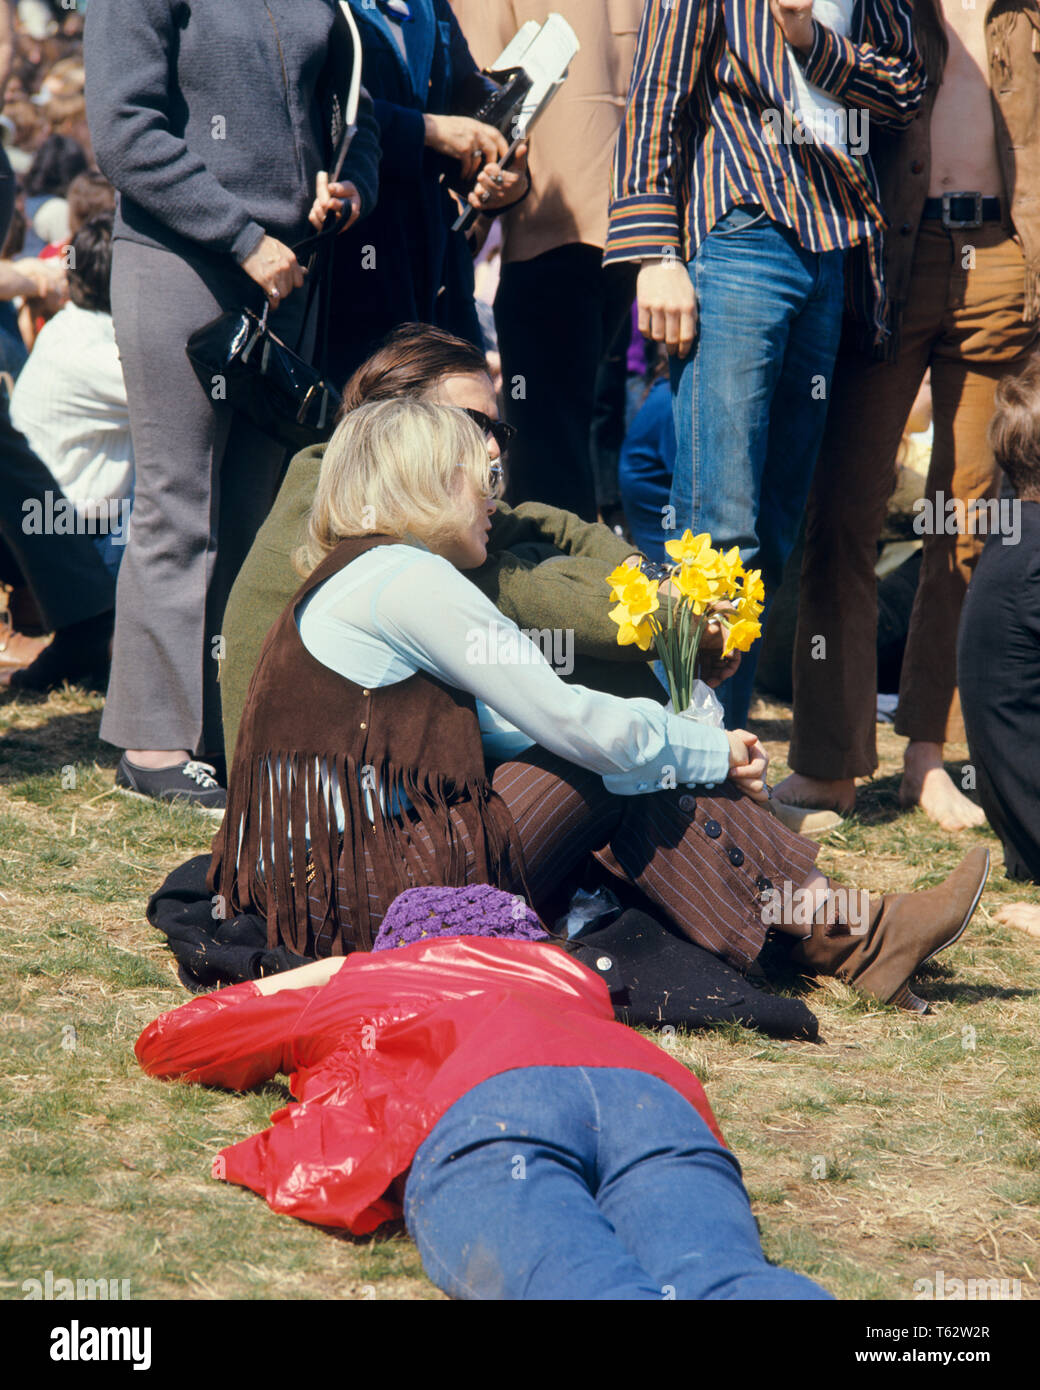 1960s BLONDE WOMAN IN FRINGED VEST HOLDING YELLOW DAFFODILS AMIDST CROWD 1969 PEACE RALLY FAIRMONT PARK PHILADELPHIA PA USA - kc4417 HAR001 HARS CELEBRATION FEMALES UNITED STATES FULL-LENGTH LADIES PERSONS INSPIRATION UNITED STATES OF AMERICA CARING SERENITY SPIRITUALITY VEST STRENGTH STYLES STRATEGY EXTERIOR PA POWERFUL IN OF DAFFODILS DEMONSTRATION POLITICS CONNECTION CONCEPTUAL FAIRMONT PARK STYLISH SUPPORT MOCCASINS ANONYMOUS 1969 COOPERATION FASHIONS FRINGED MIDST TOGETHERNESS YOUNG ADULT WOMAN CAUCASIAN ETHNICITY COUNTERCULTURE HAR001 OLD FASHIONED Stock Photo